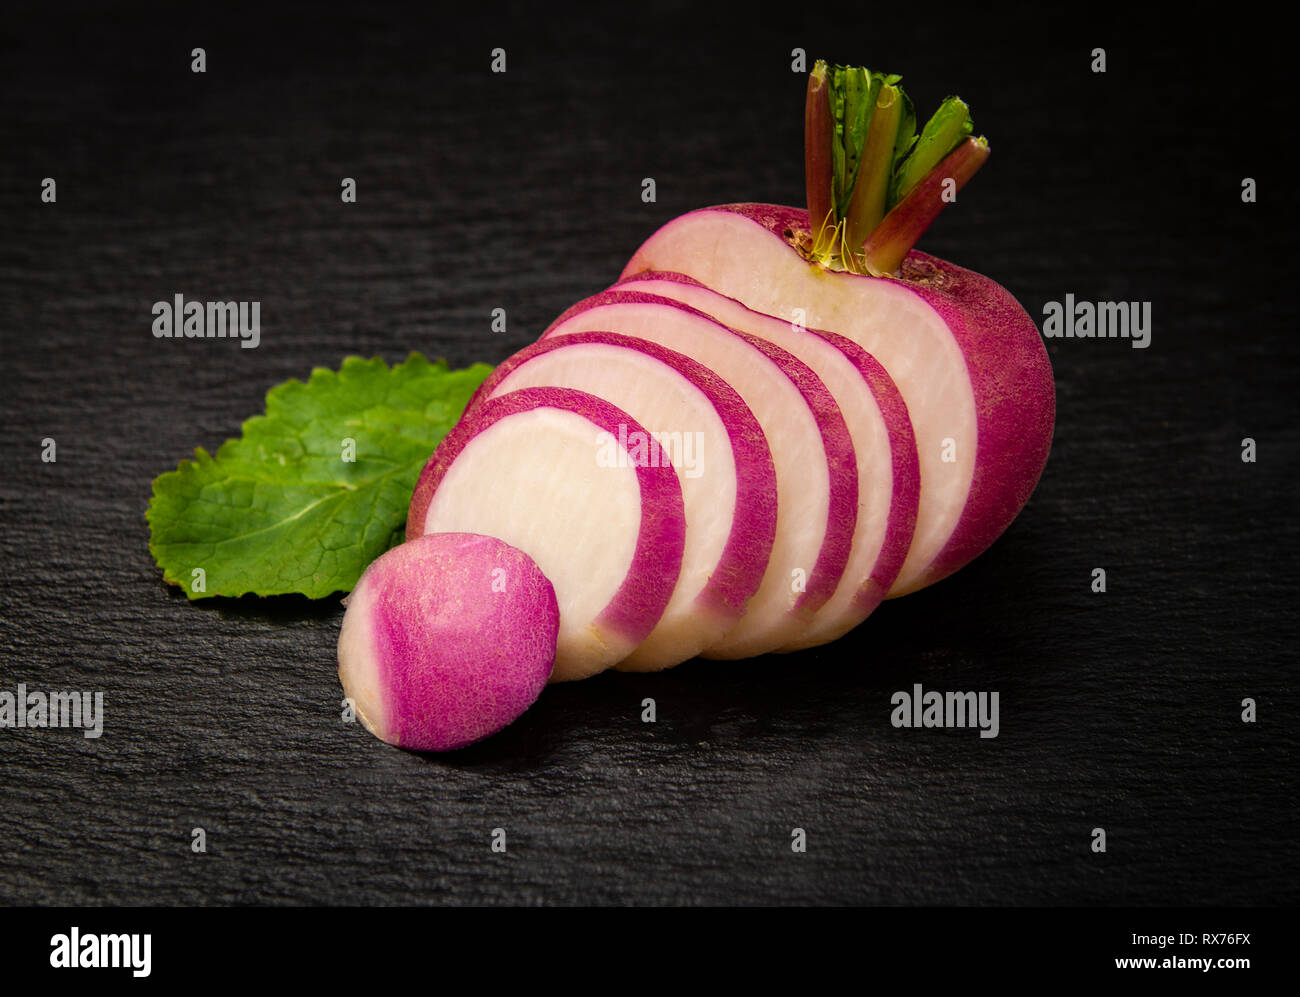 close-up of a red turnip sliced over a black background Stock Photo